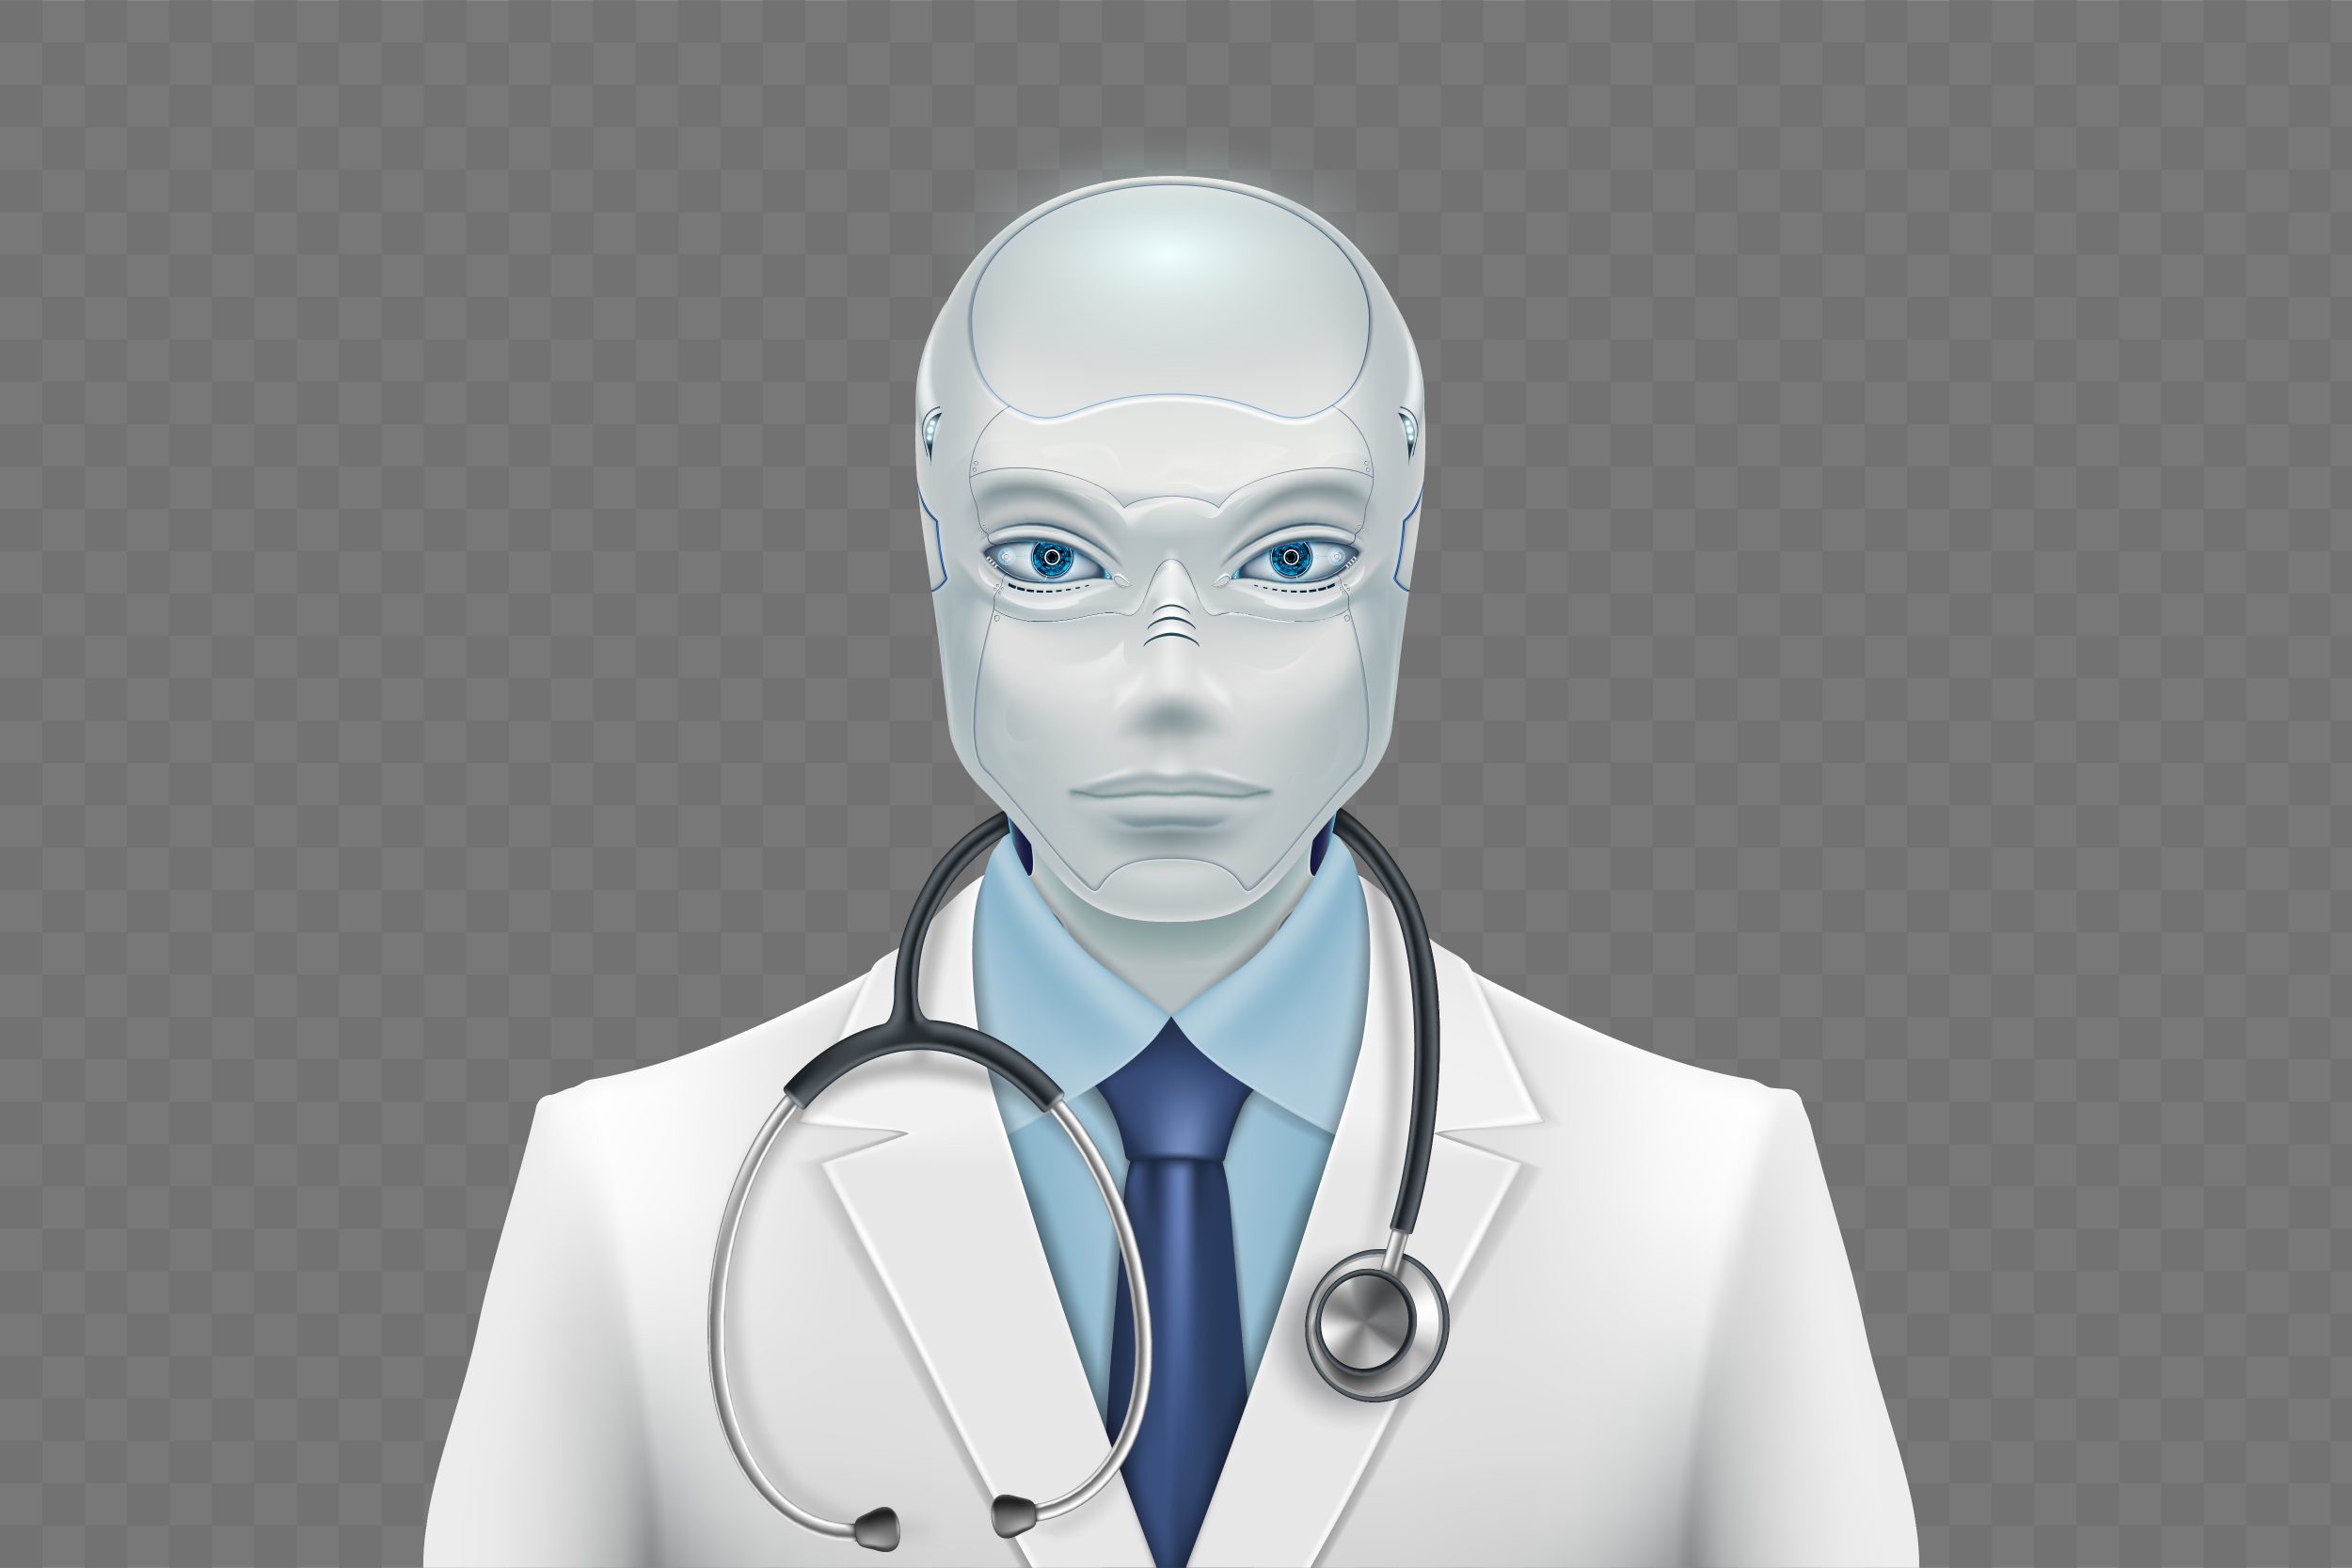 Doctor robot showcasing Artificial Intelligence in Medical Education wearing a medical coat and a stethoscope.